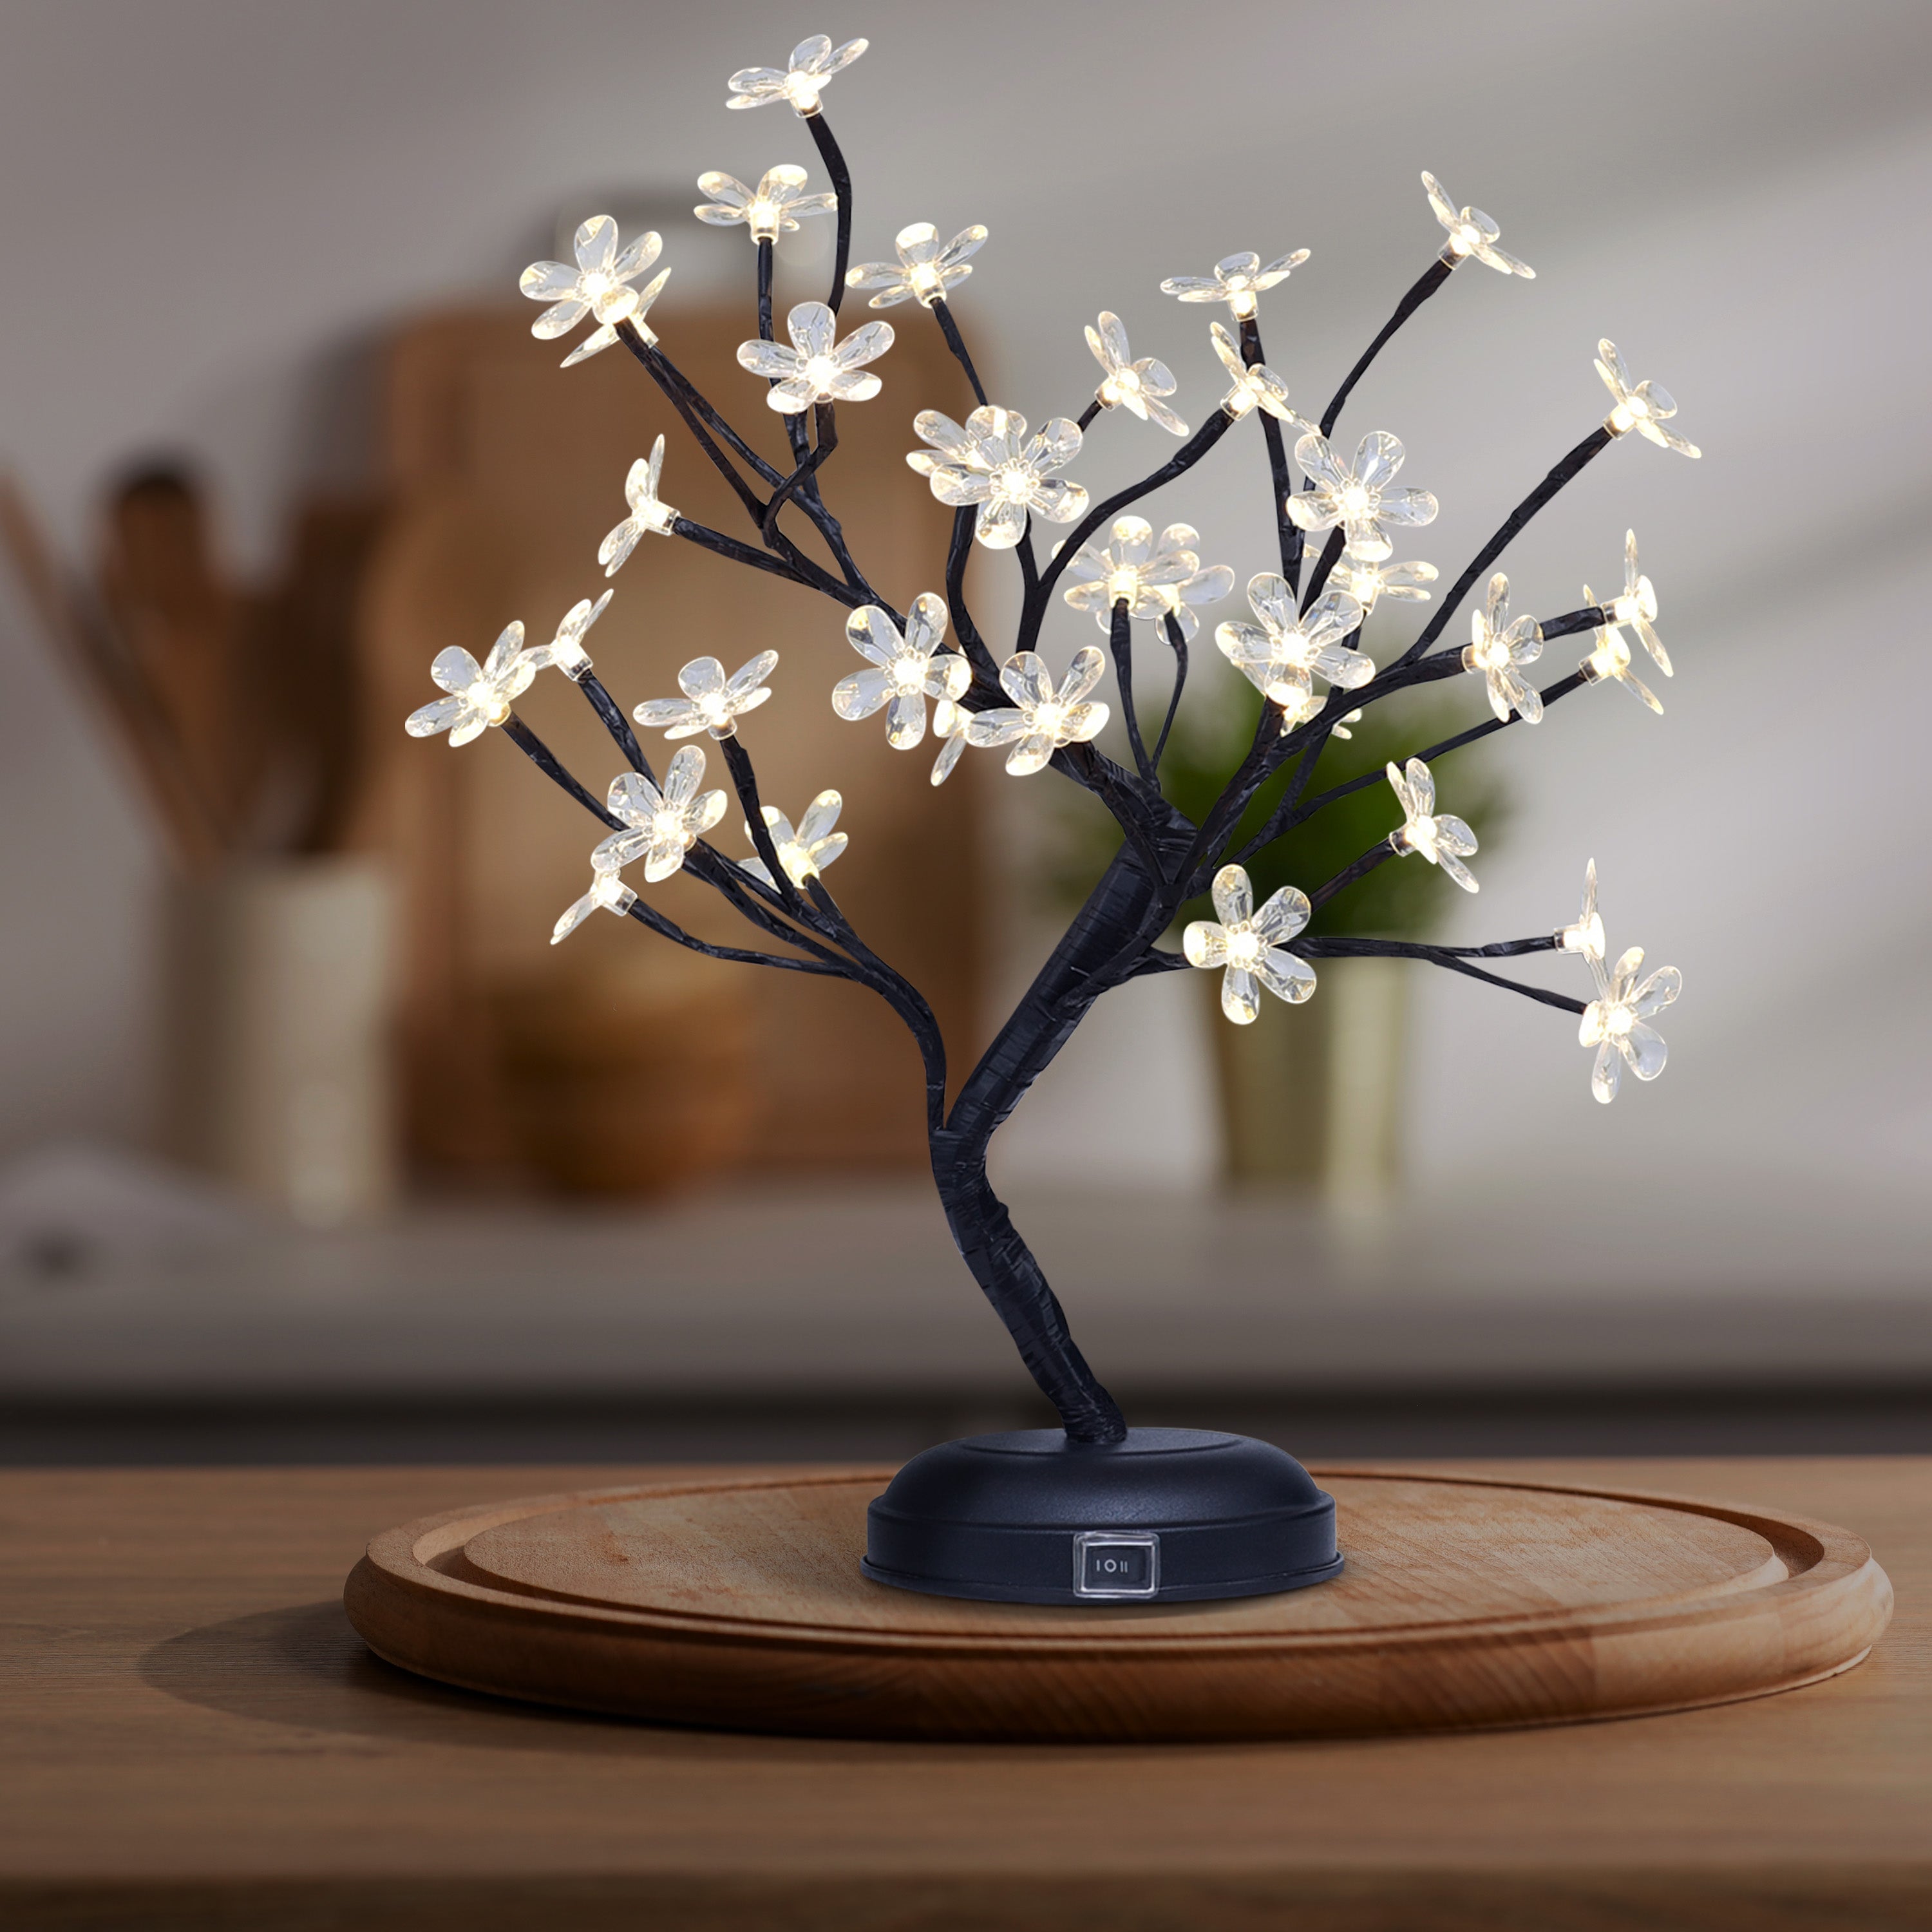 18IN Lighted Cherry Blossom Tree Lamp with 36 Acrylic LED, Adapter Plug in & Battery Powered, for Indoor and Outdoor, Warm White-LIGHTSHARE